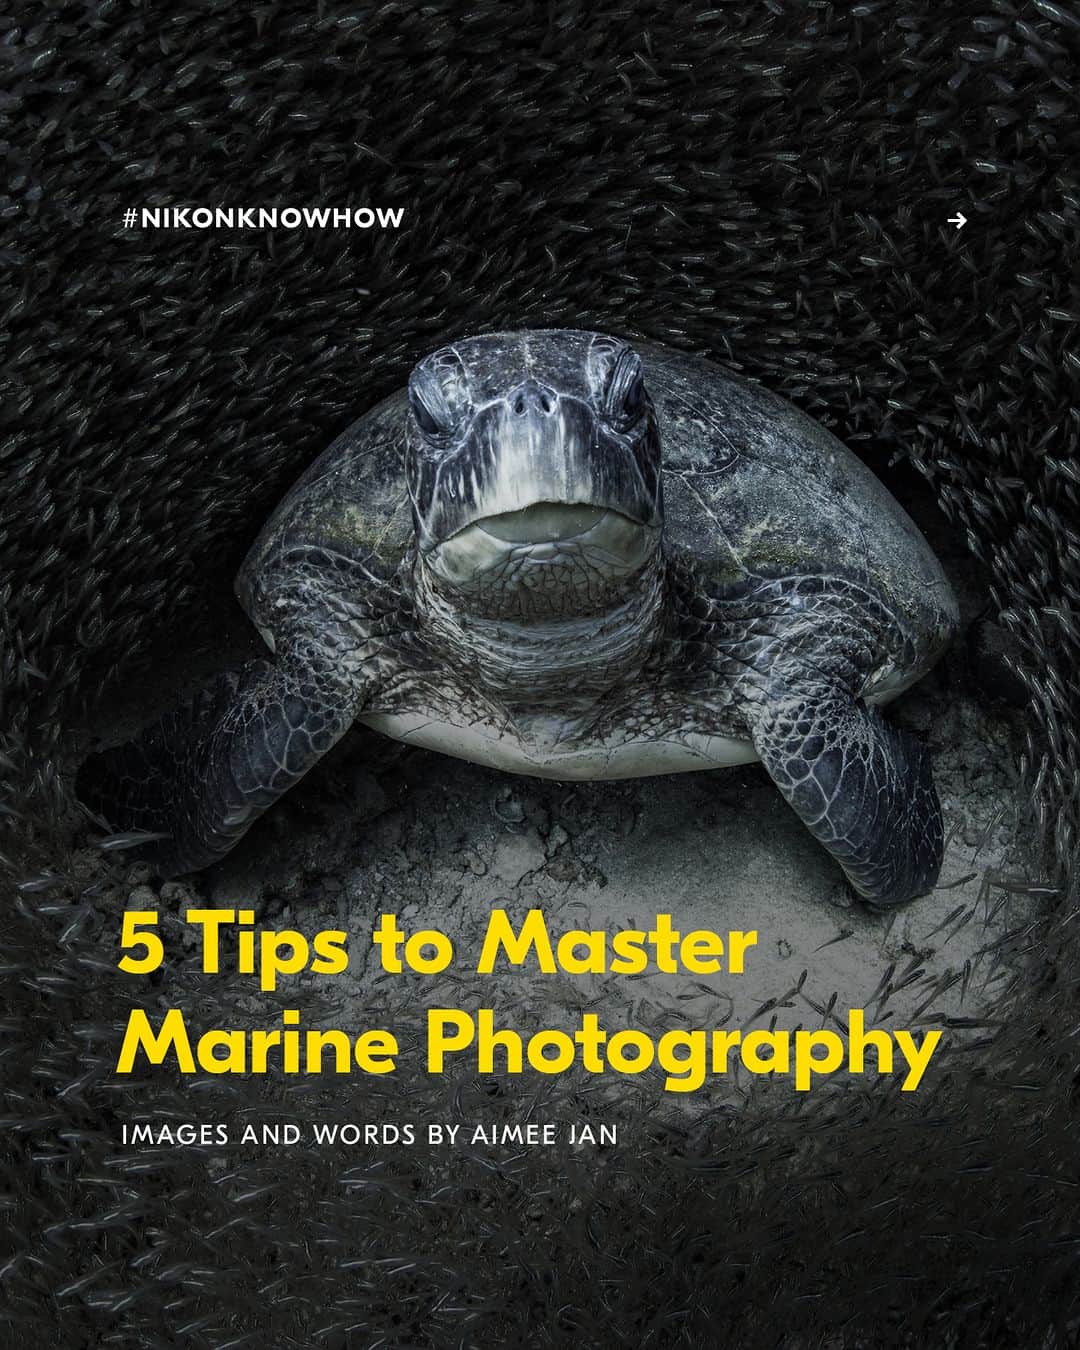 Nikon Australiaのインスタグラム：「Interested in getting acquainted with underwater wildlife?  In today's #NikonKnowHow, @oceanaimee shares her expert advice on capturing stunning photos and approaching underwater sea creatures in her 5 Tips to Master Marine Photography.  Swipe through to read them all!  #Nikon #NikonAustralia #MyNikonLife #NikonCreators #NikonKnowHow #Zseries #UnderwaterPhotography #WildlifePhotography #Australia」